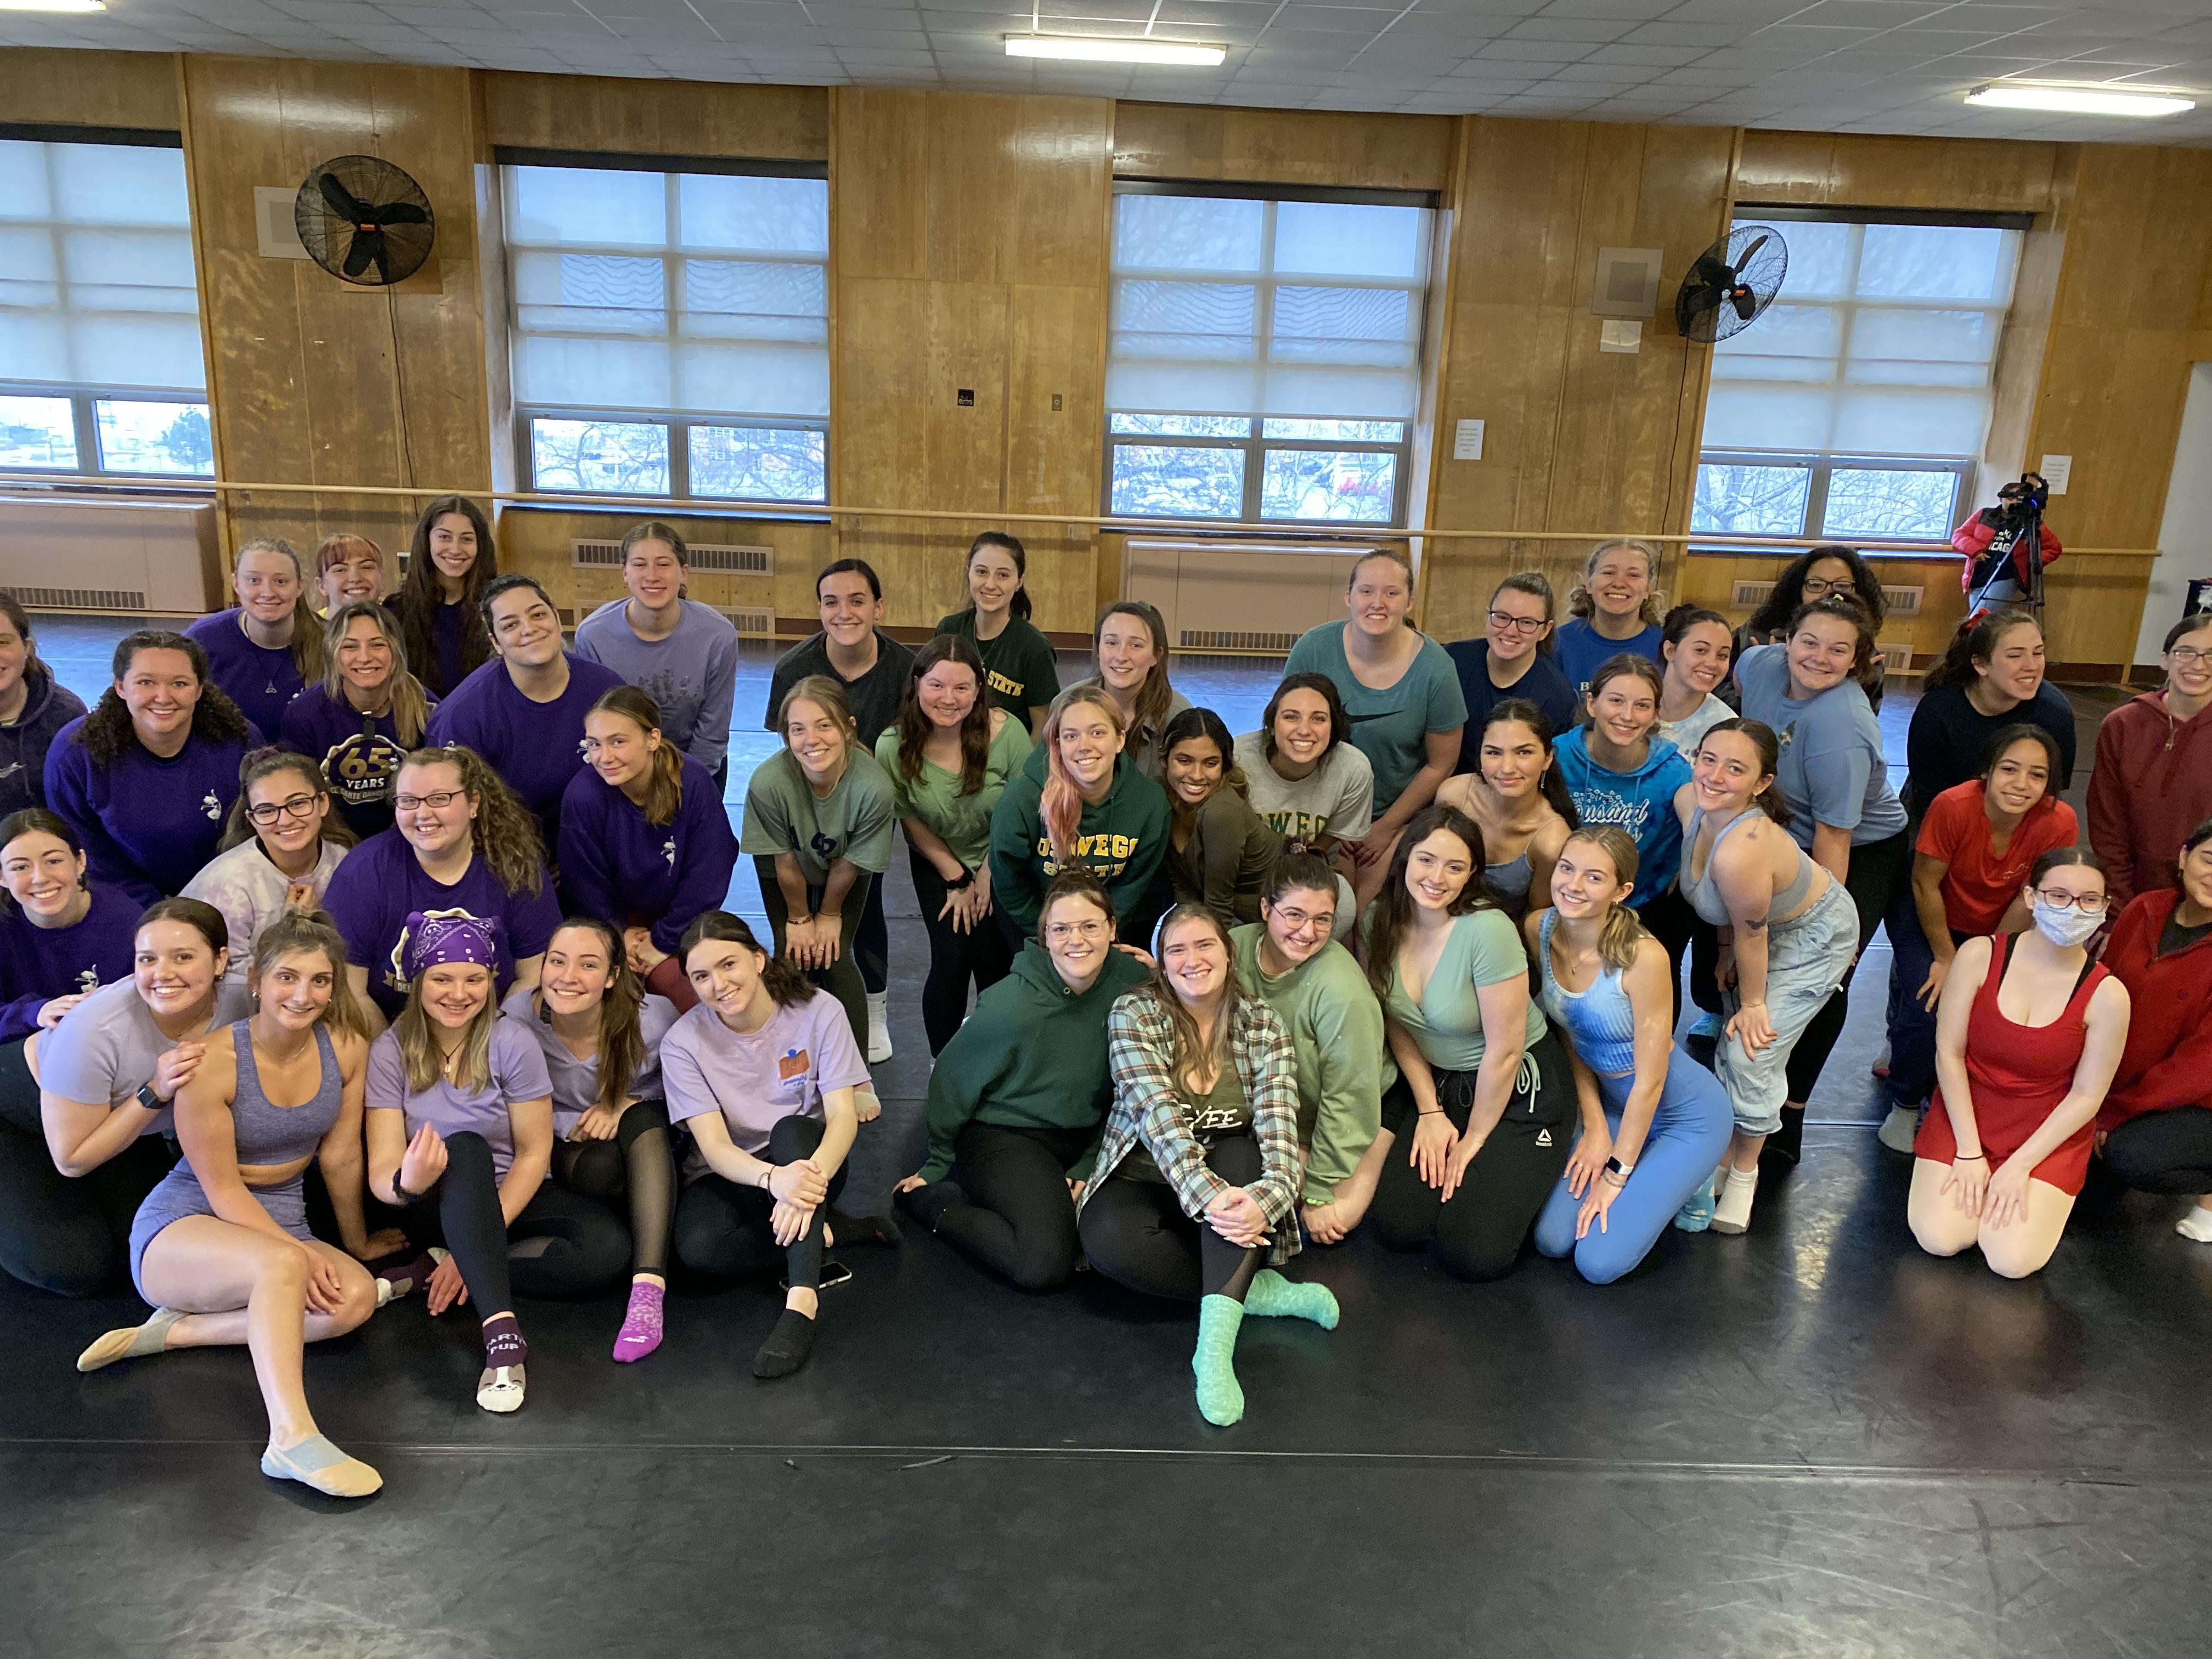 The college’s Del Sarte Dance Club with a group photo as they prepare for their spring recital